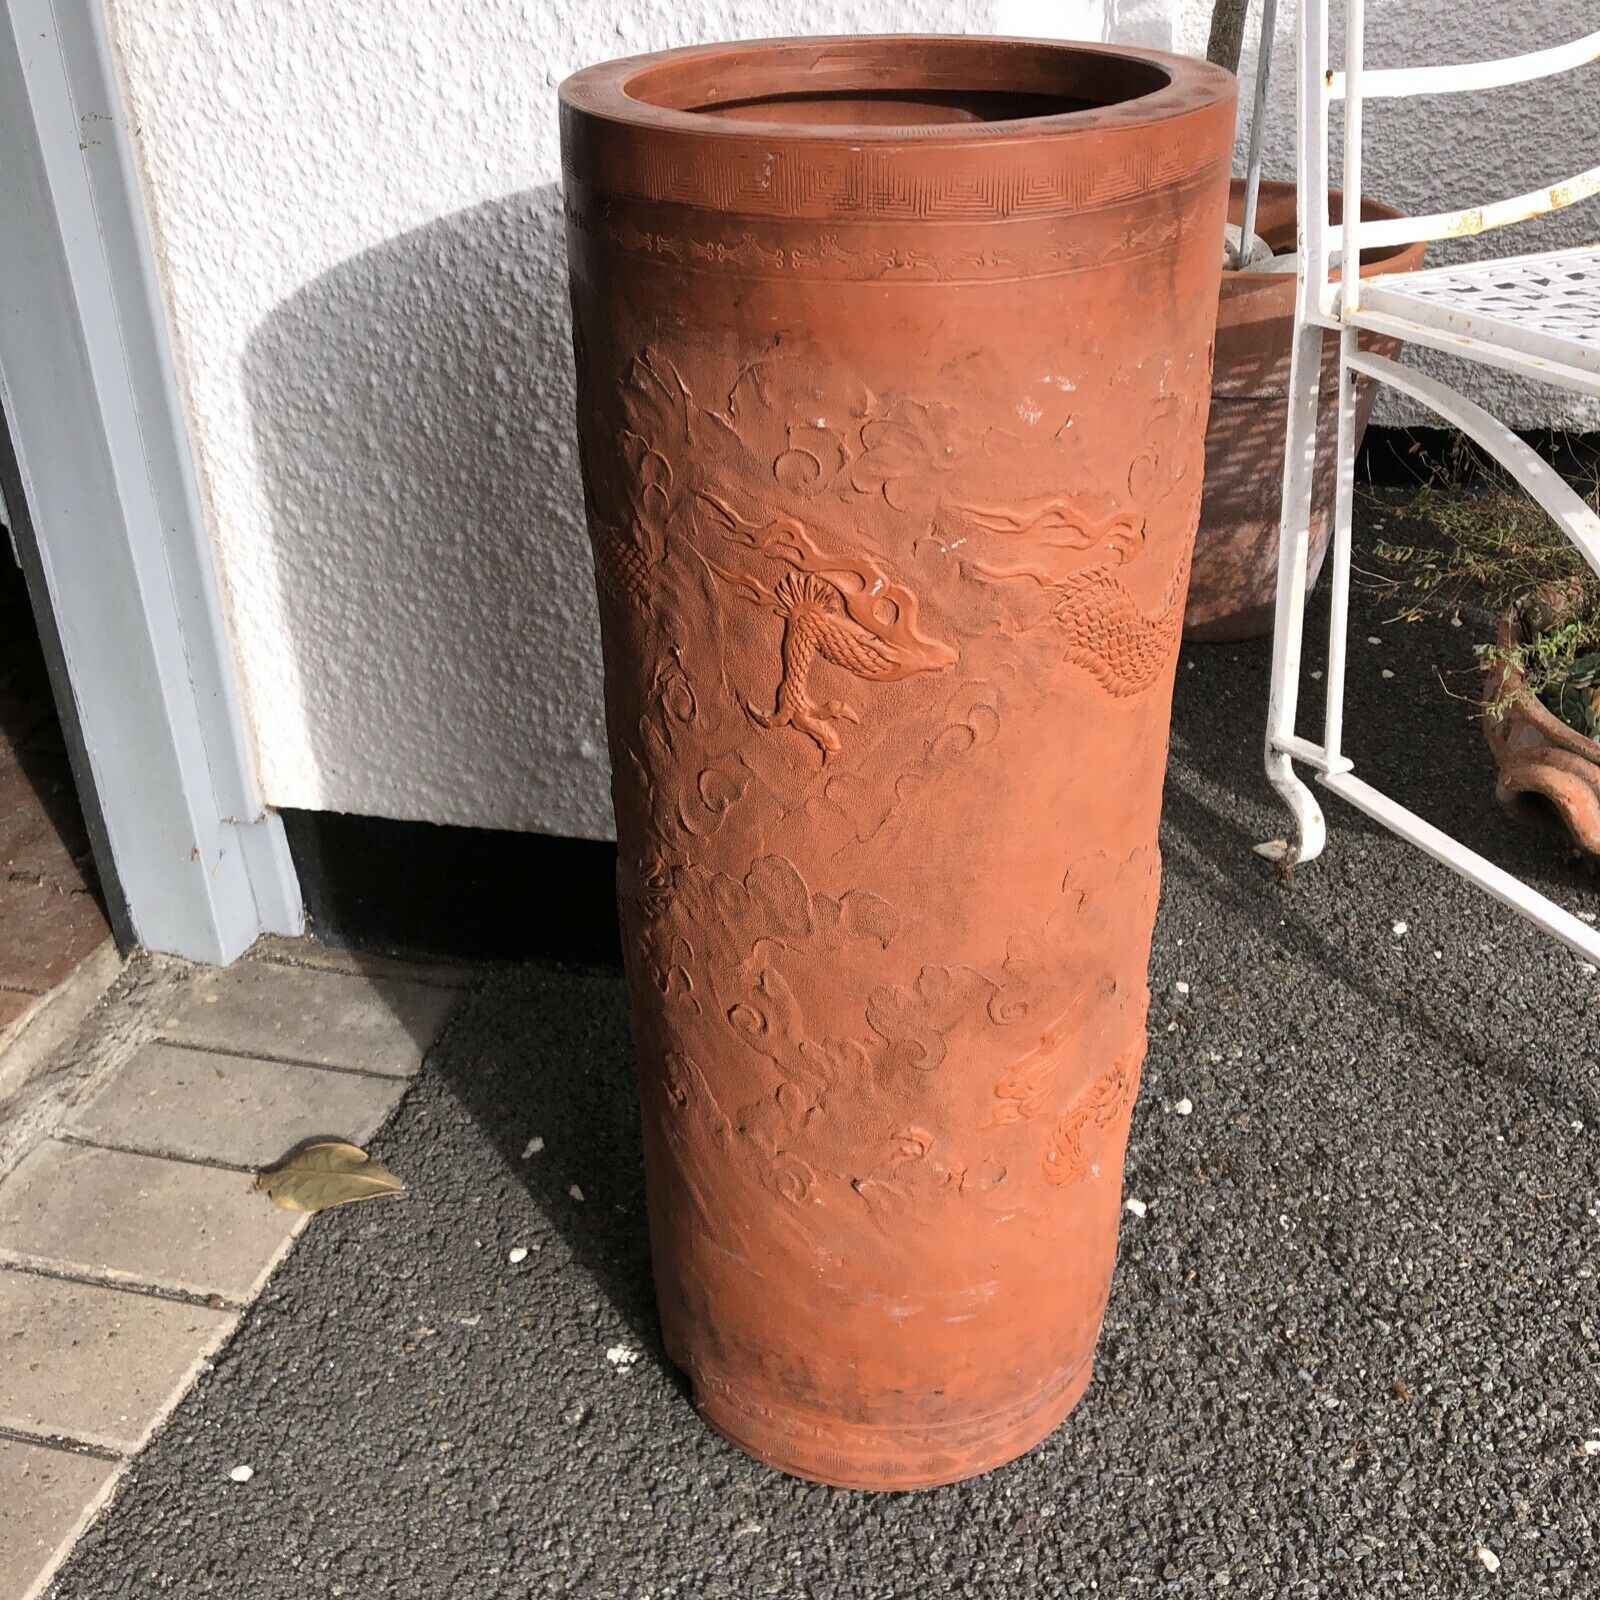 Terracotta tall vase with chinese graphics